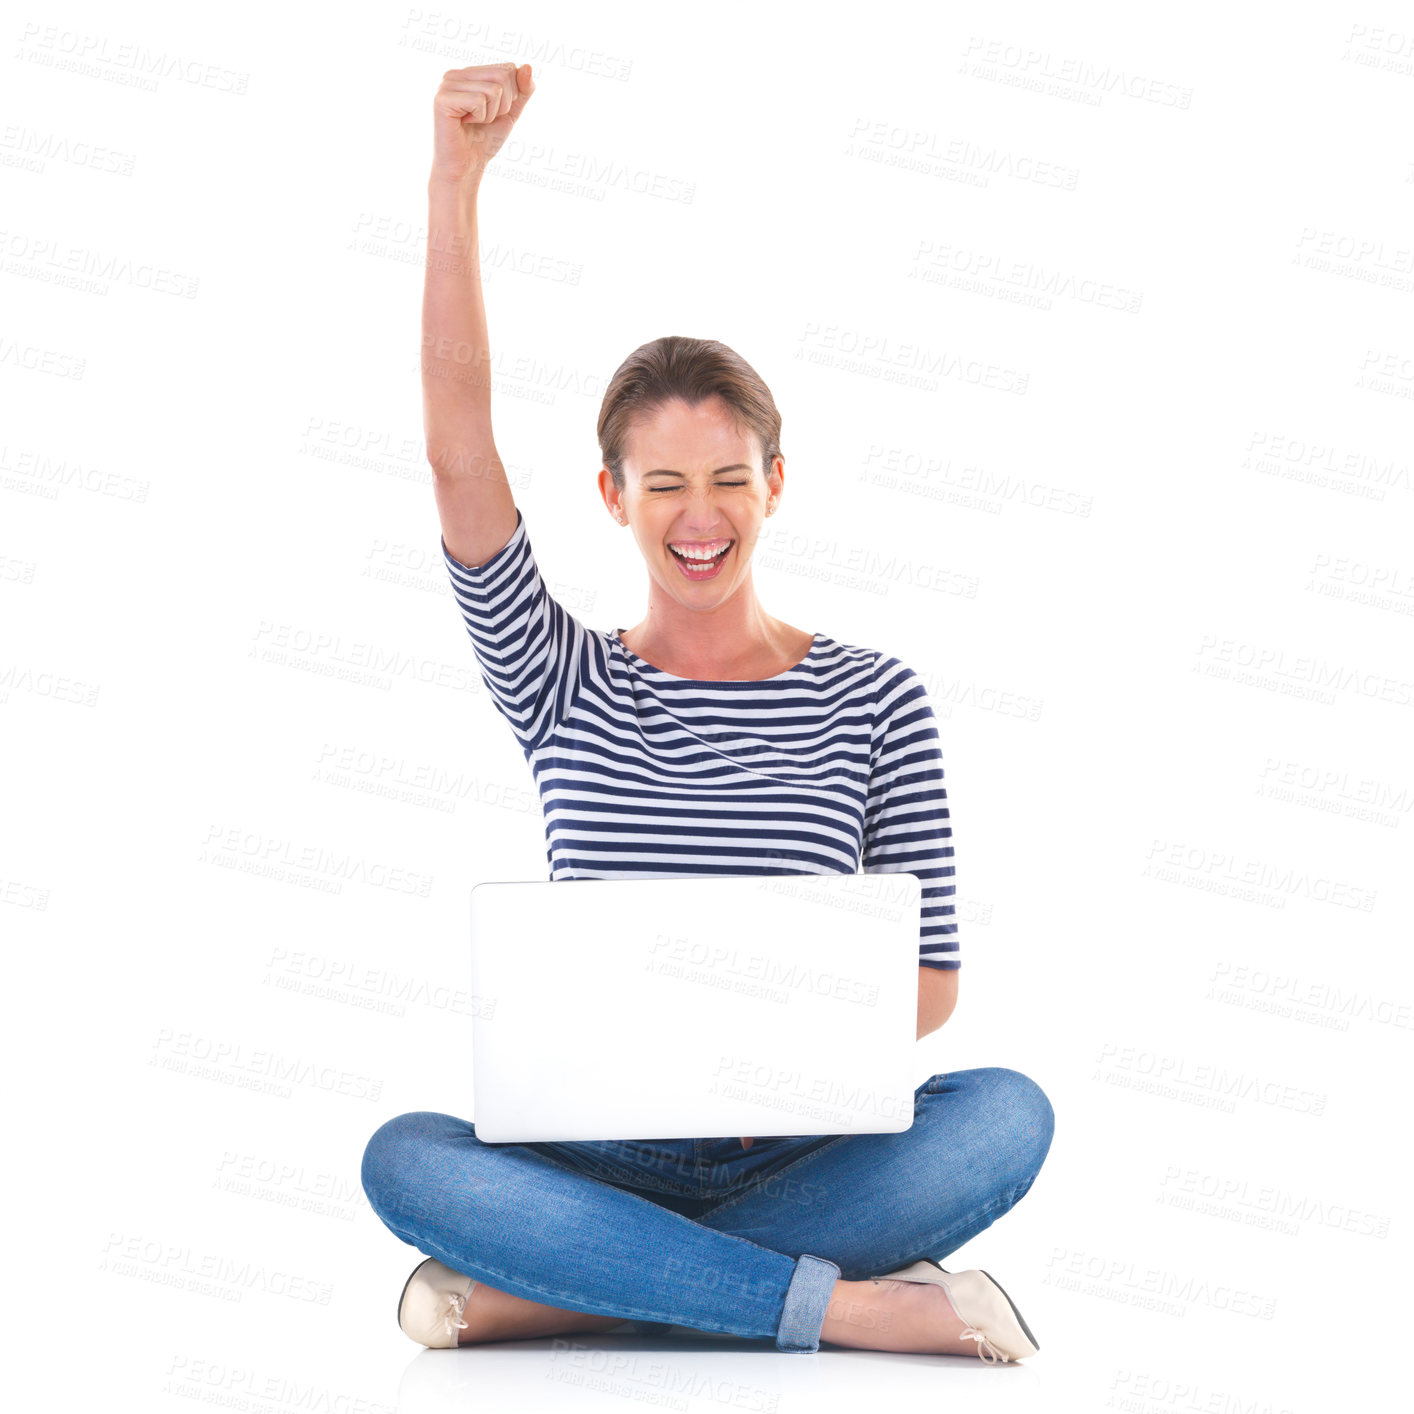 Buy stock photo Studio shot of a young woman sitting cross legged on the floor cheering while using a laptop